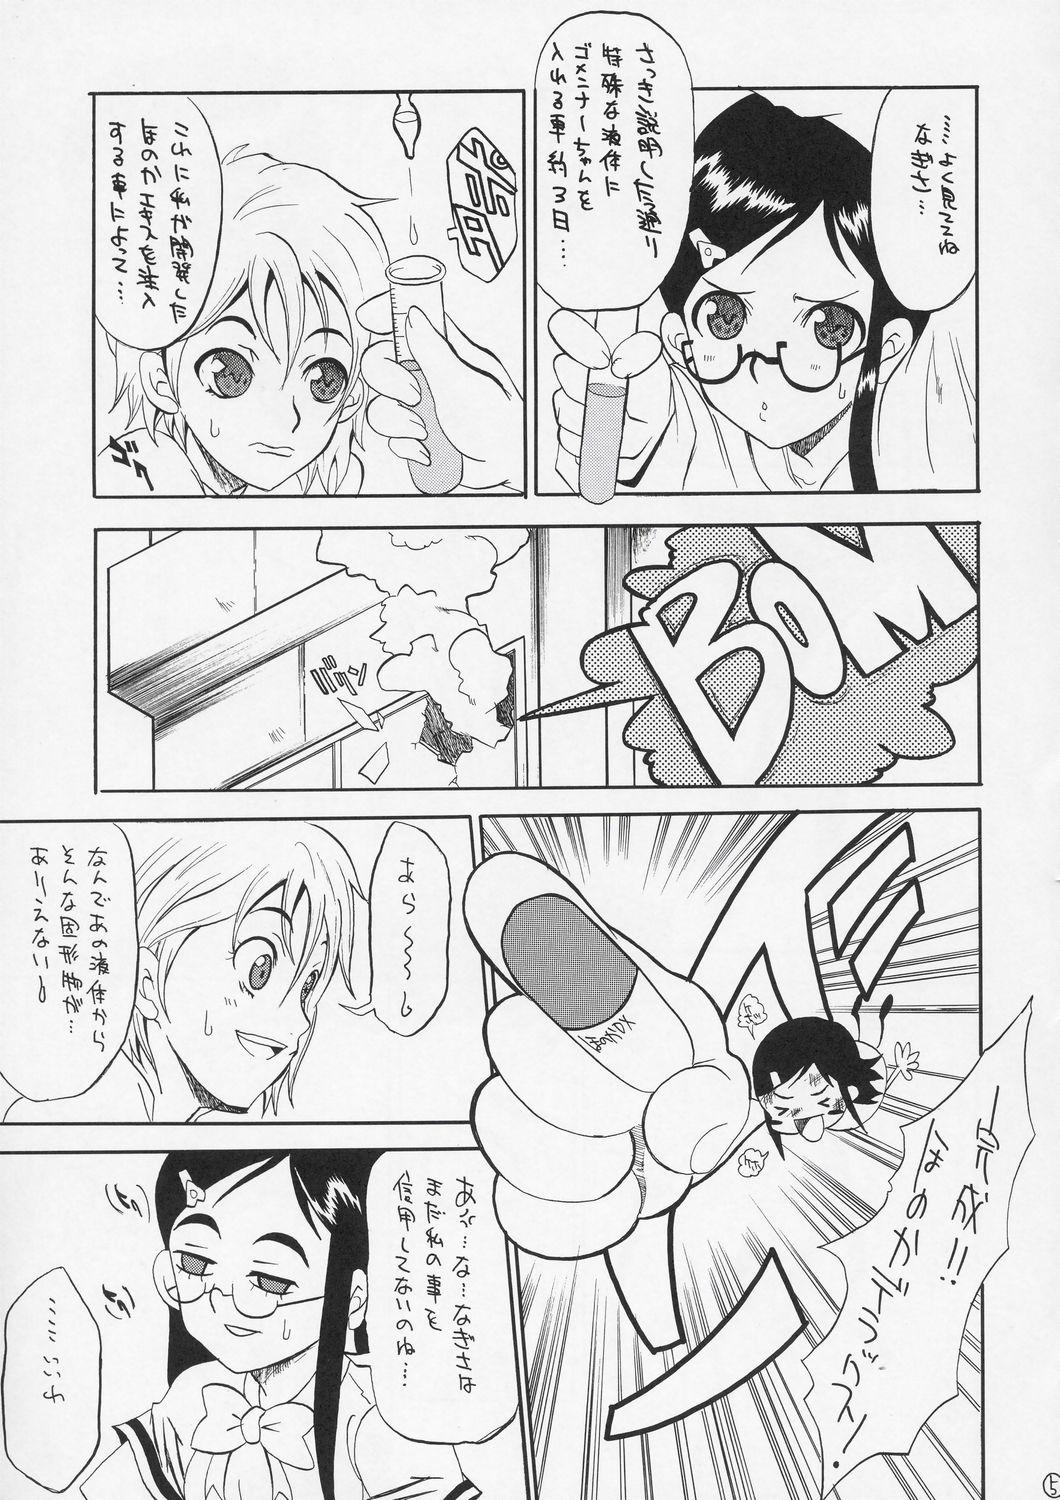 Grosso Puretty Cures - Pretty cure Gay Public - Page 4